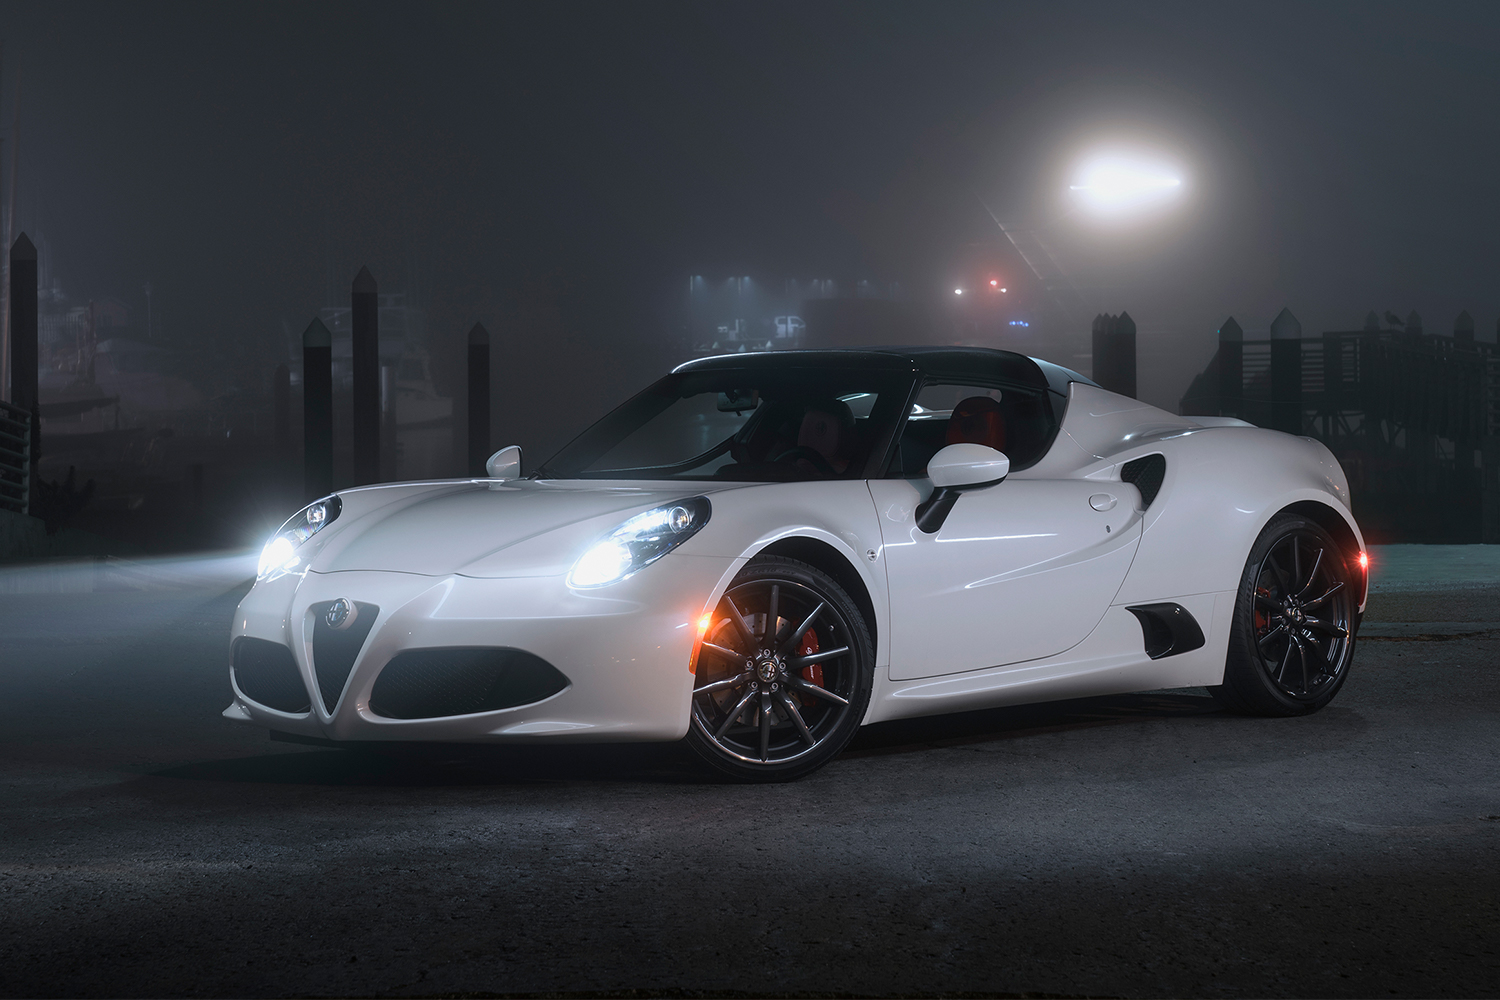 A white Alfa Romeo 4C with its headlights on at night in a foggy area